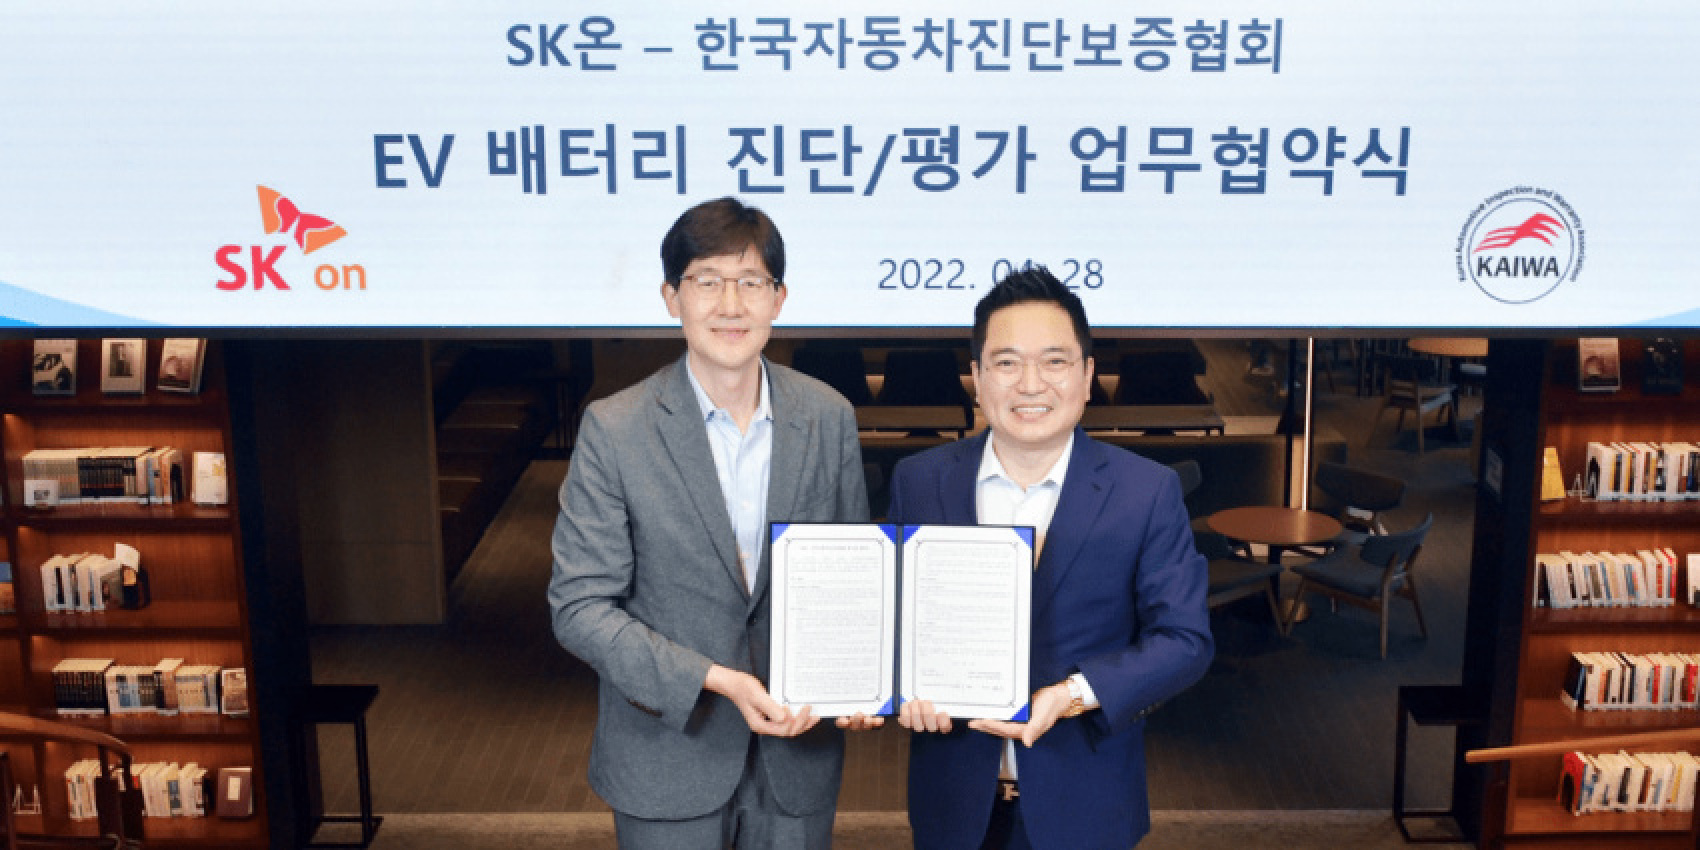 autos, battery & fuel cell, cars, electric vehicle, battery cells, battery manufacture, kaiwa, molit, sk innovation, sk on, south korea, sk on to work on korean battery standards